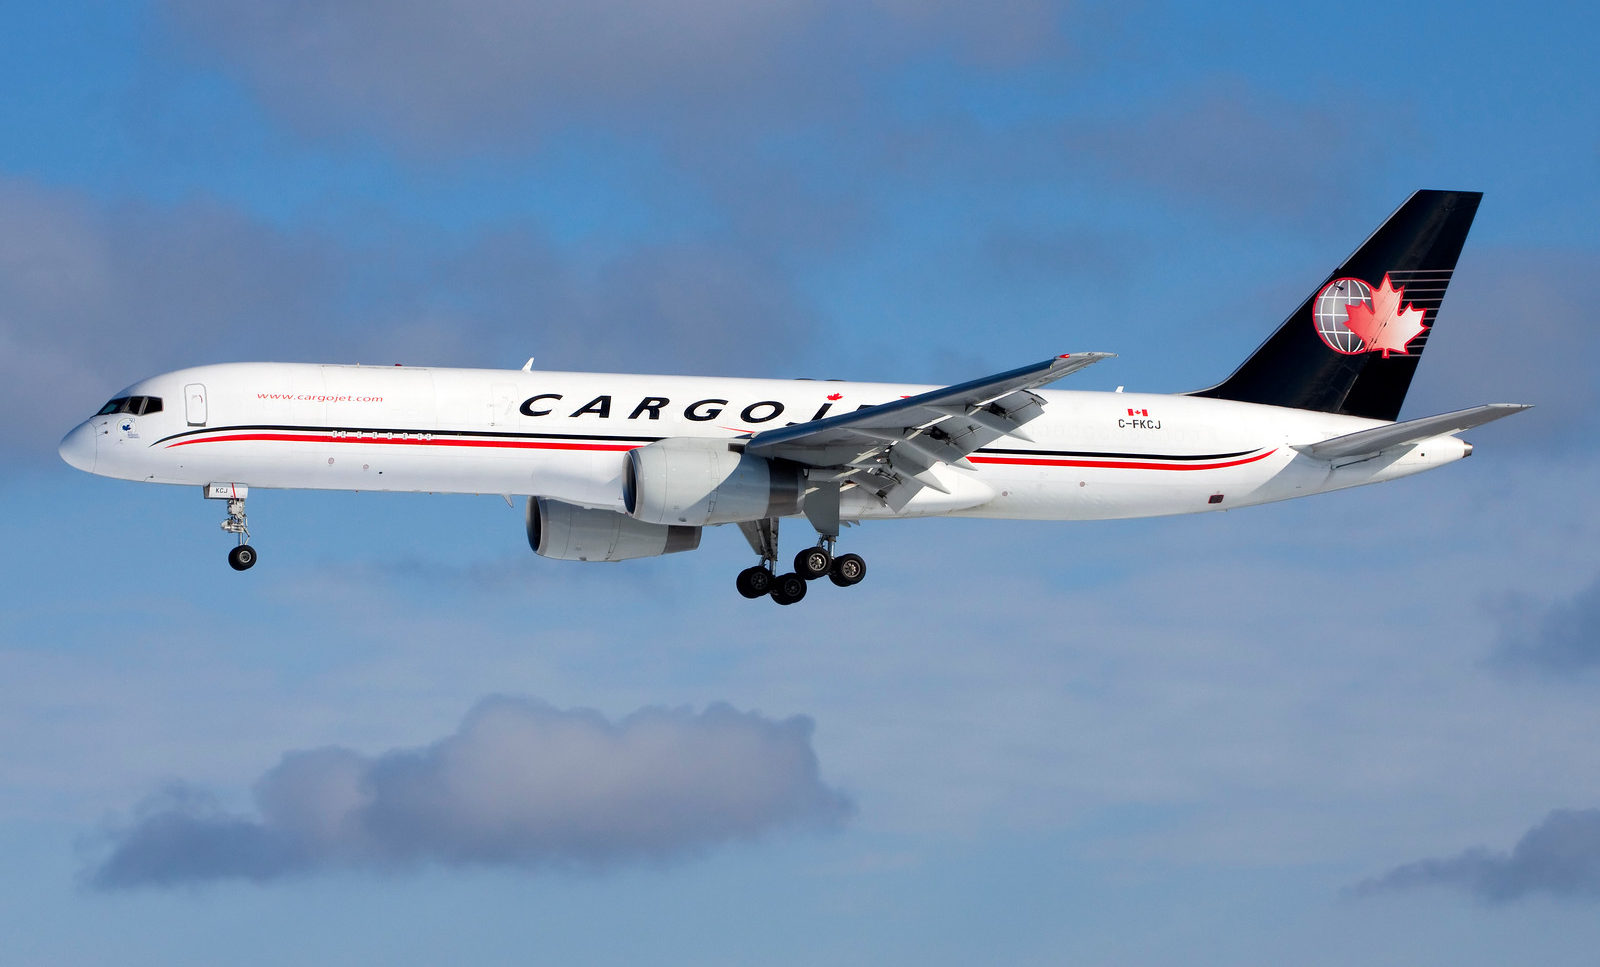 Cargojet provides overnight services to Canadians, with over one million pounds of cargo on a nightly-basis. Cargojet Photo